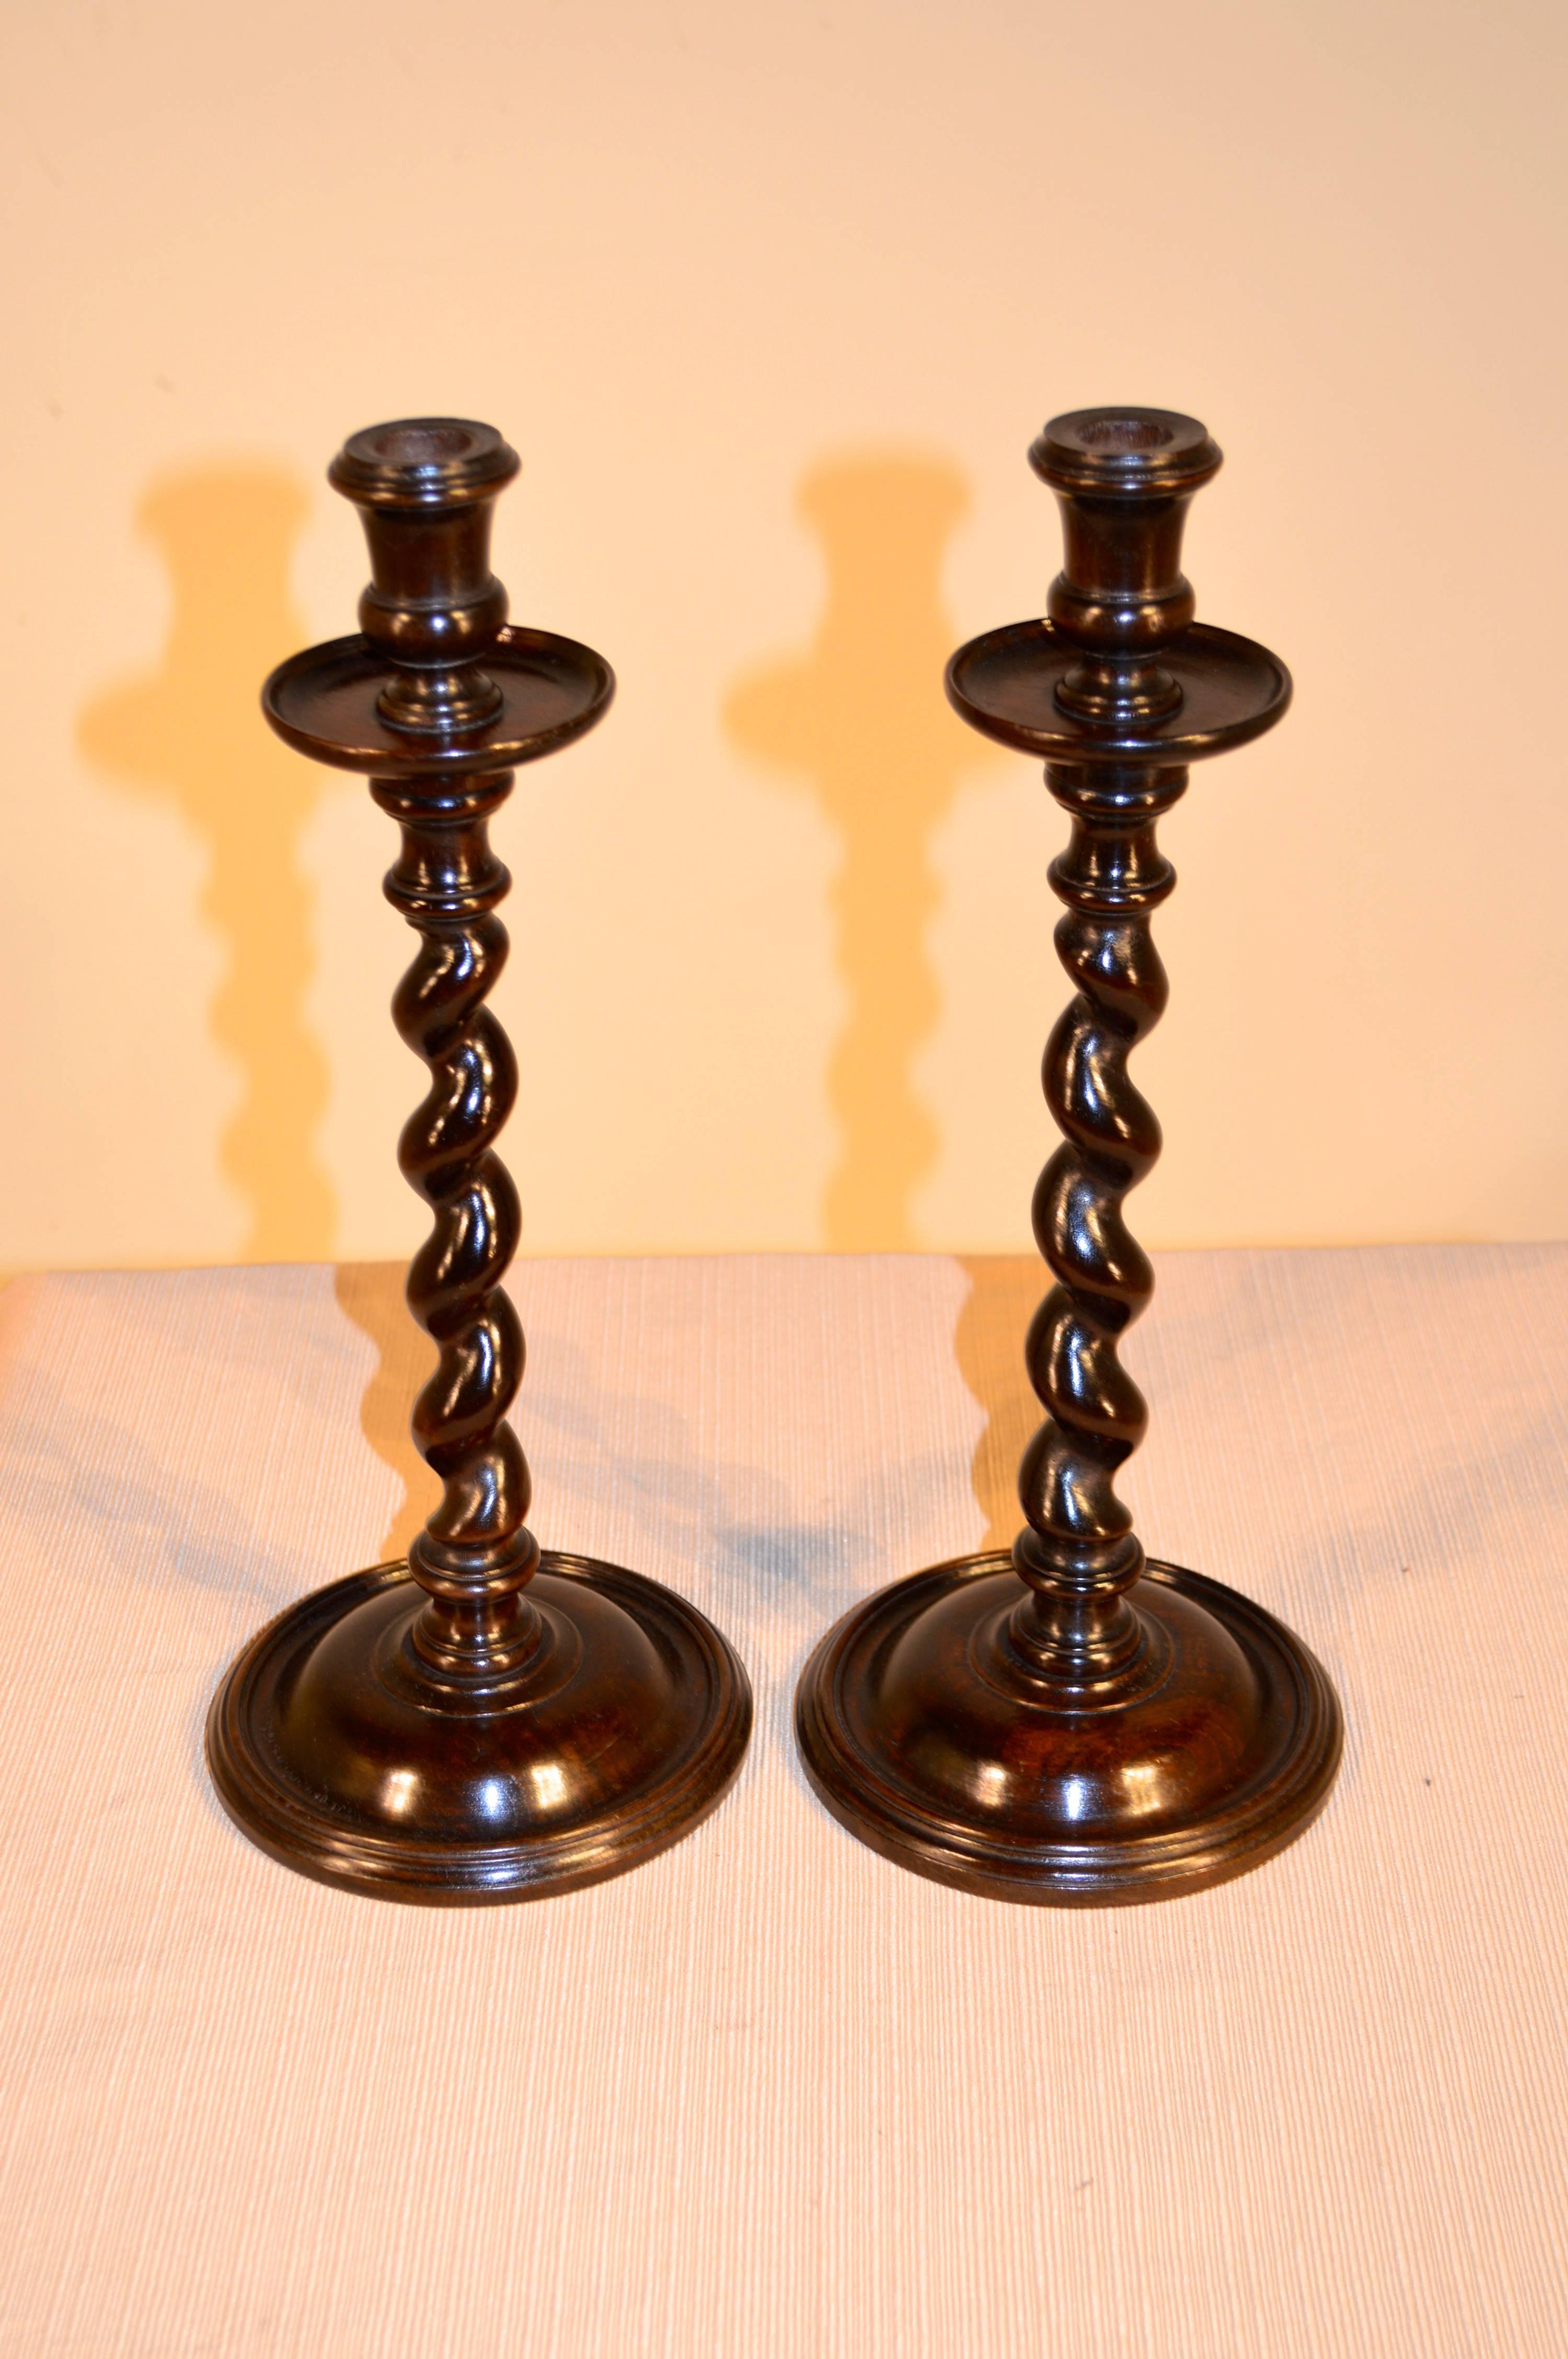 Pair of English oak candlesticks with hand-turned candle cups and bobeches, following down to hand-turned barley twist stems and bases, circa 1890.